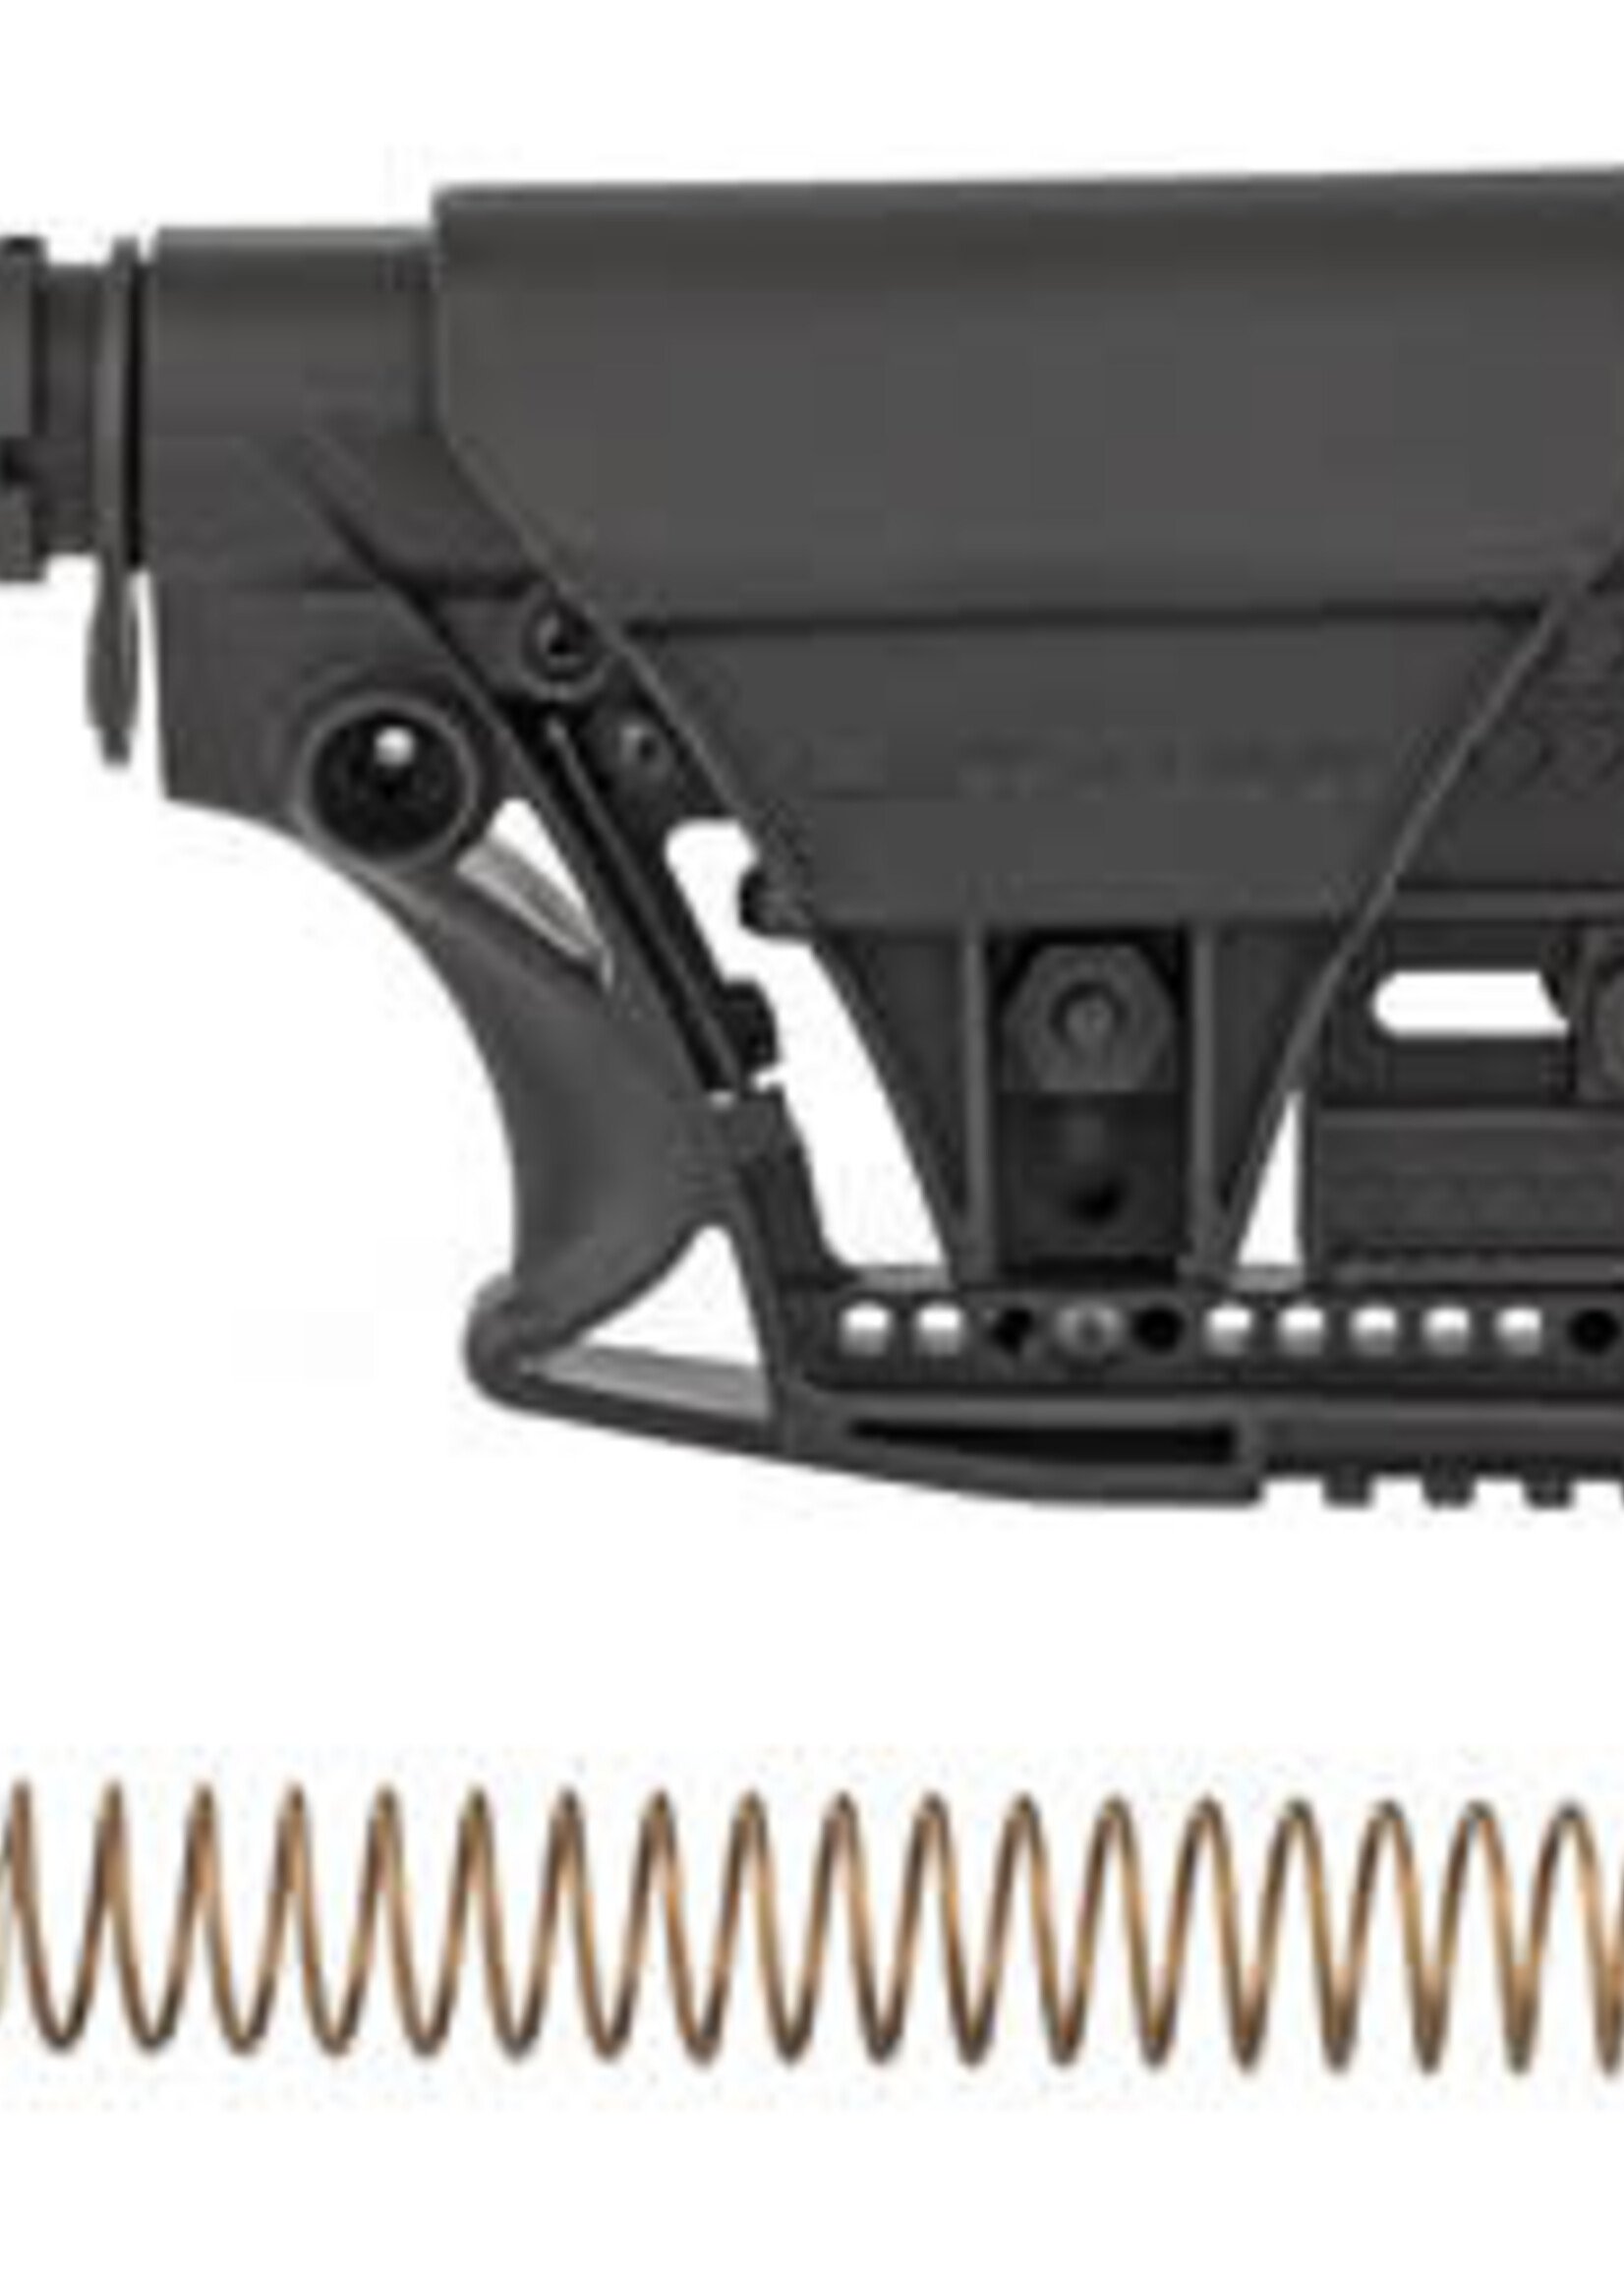 Luth-AR Luth-AR, MBA-3 Stock With Buffer Assembly, Mil-Spec Dia 6-Position Carbine Buffer Tube, .223/5.56 Buffer, Buffer Spring, Latch Plate and Lock Ring, Adjustable Length of Pull/Cheek Height/Butt Plate, Fits AR-15, Black